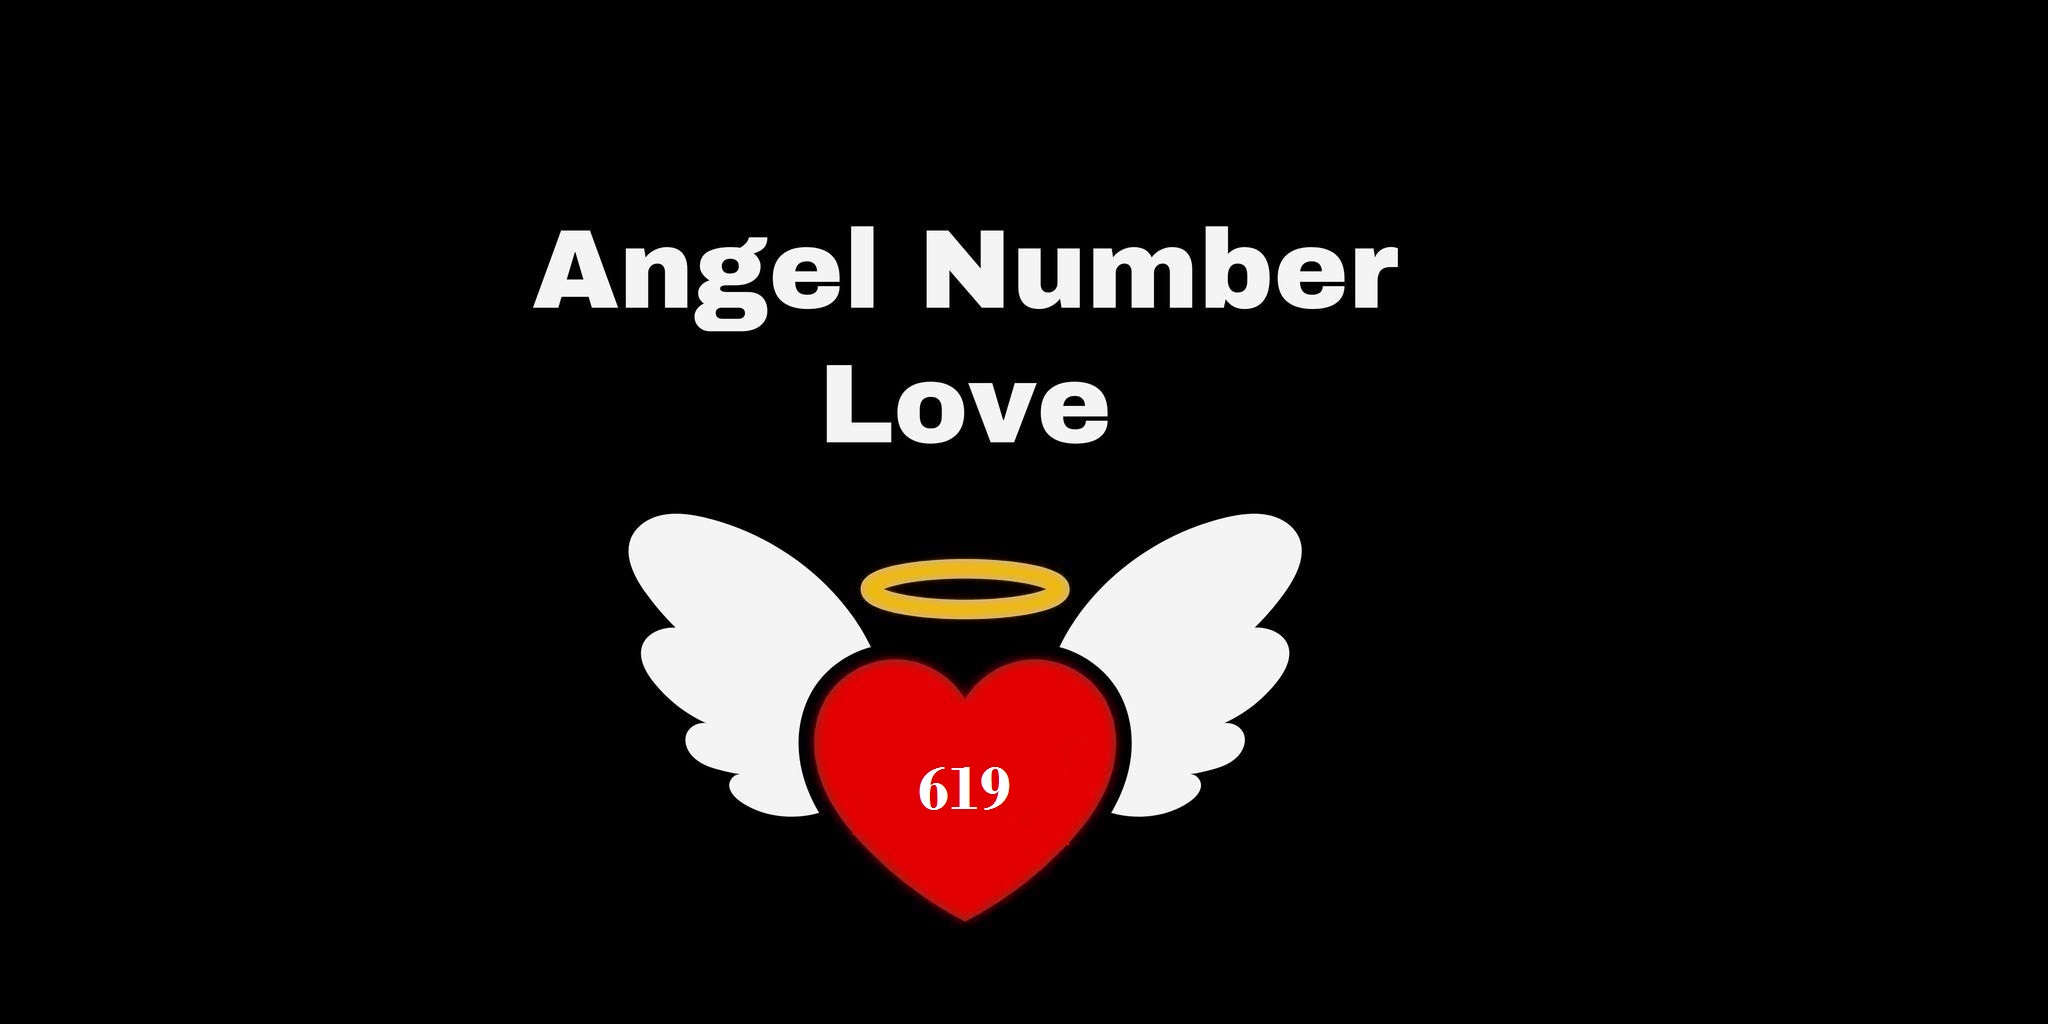 619 Angel Number Meaning In Love